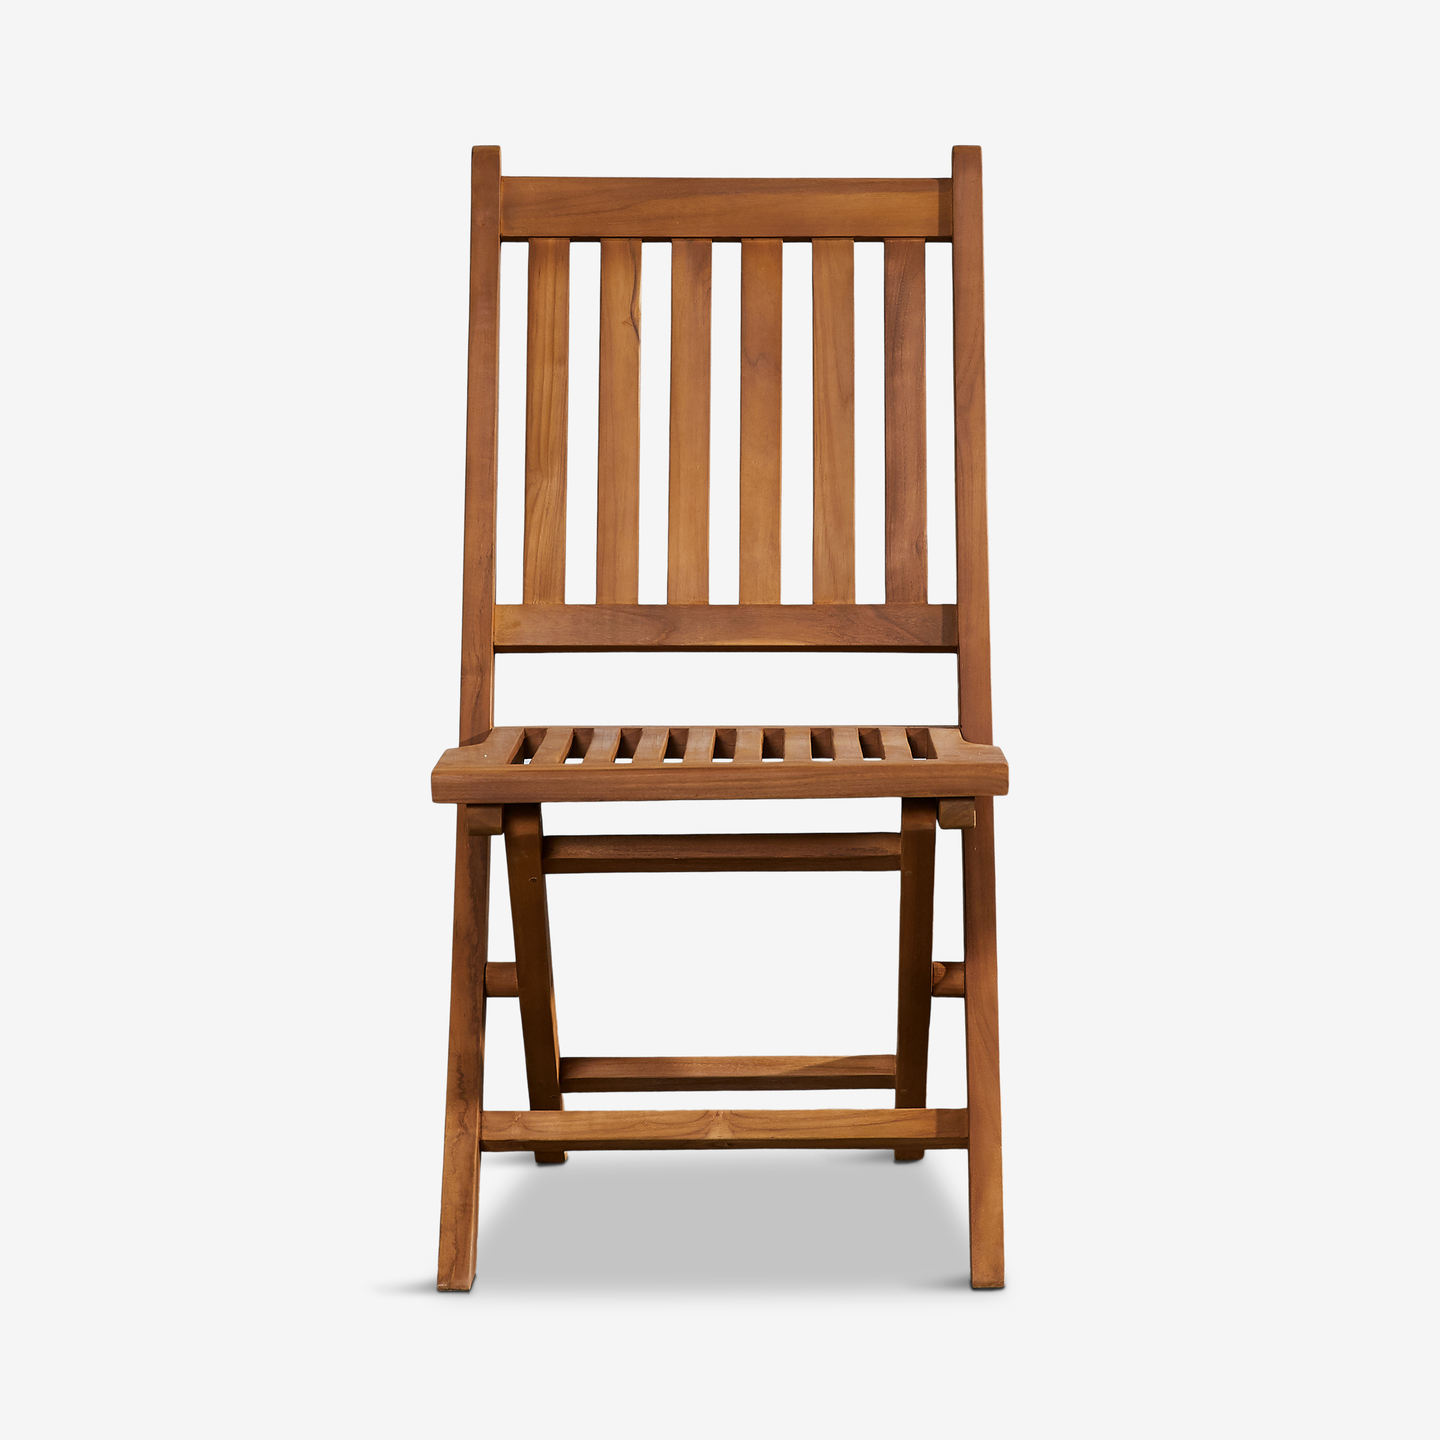 137_Del-Rey-Patio-Folding-Chair_Flat-Front 2020